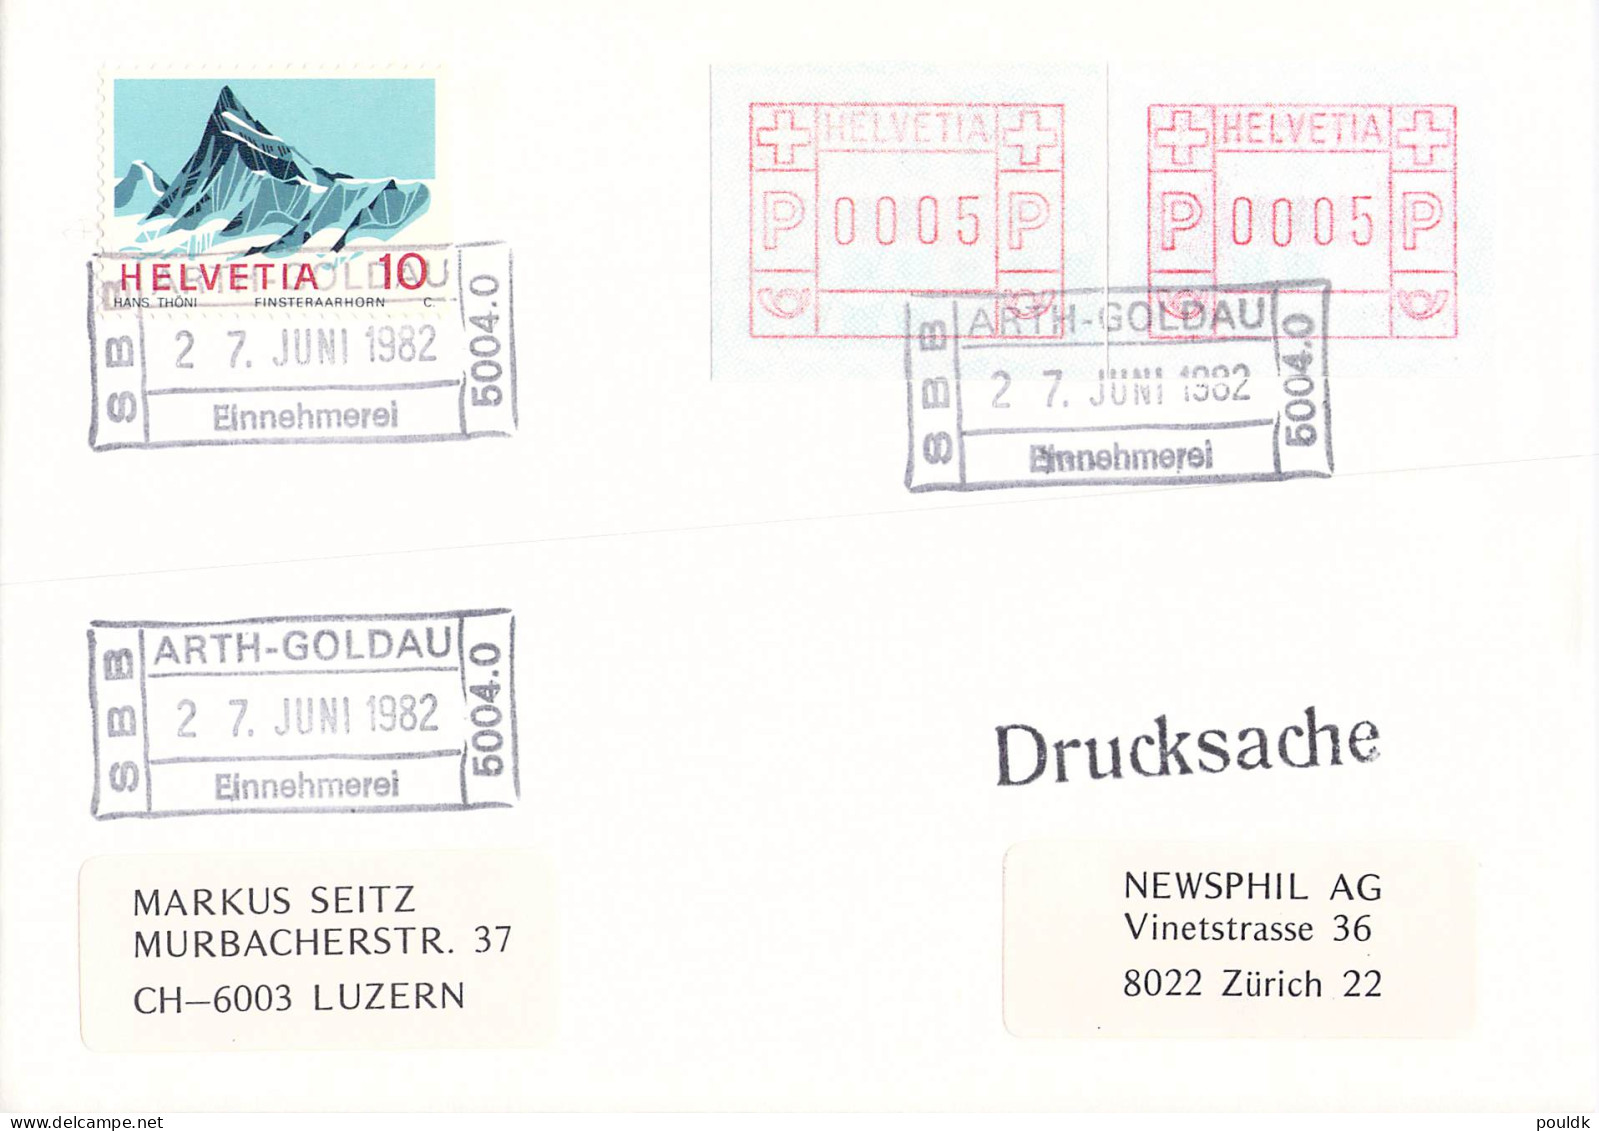 Switzerland covers/FDC franked with ATM - many errors. 25 covers. Weight 0,150 kg. Please read Sales Conditions 